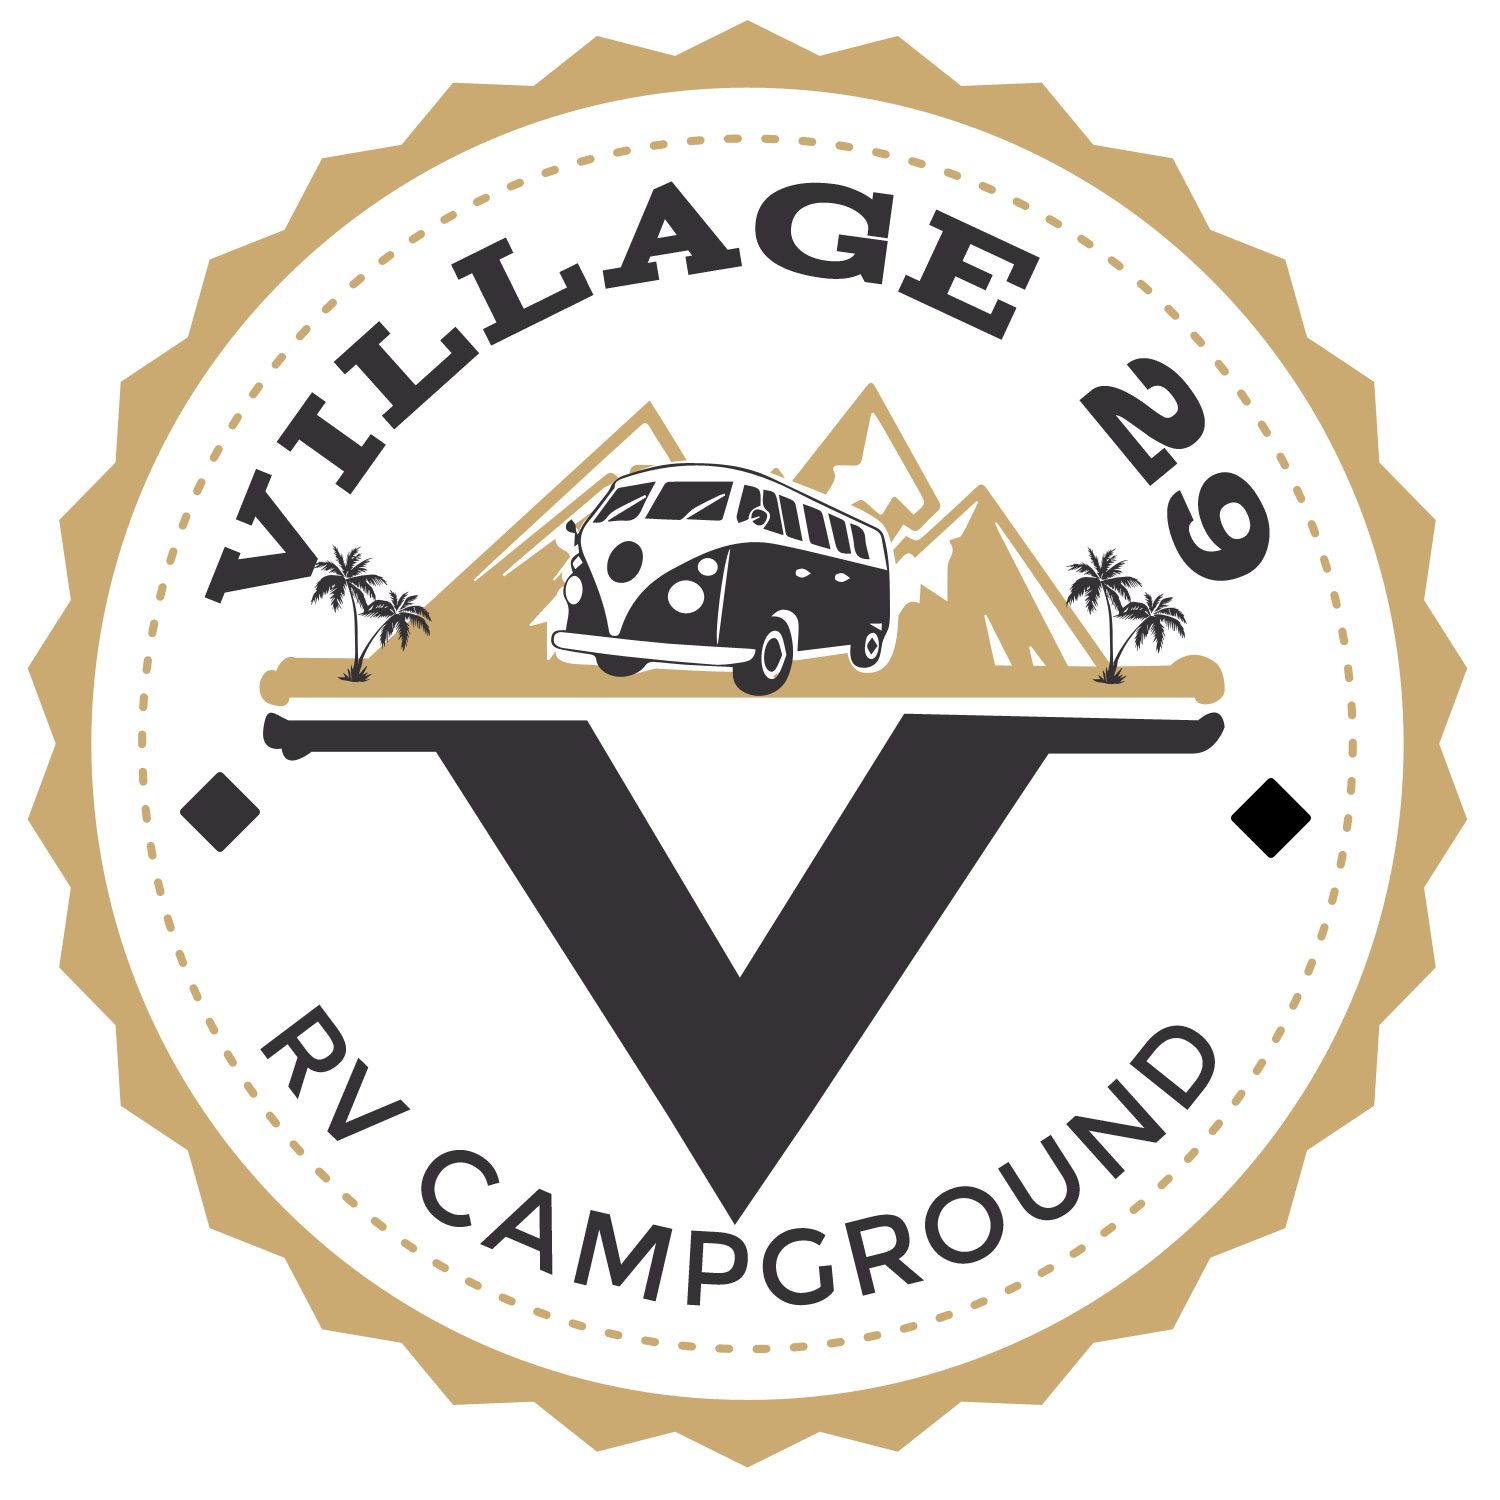 Village 29 RV Campground is located next to Spotlight 29 Casino, just minutes from the Coachella, Desert Trip and Stagecoach Music Festivals